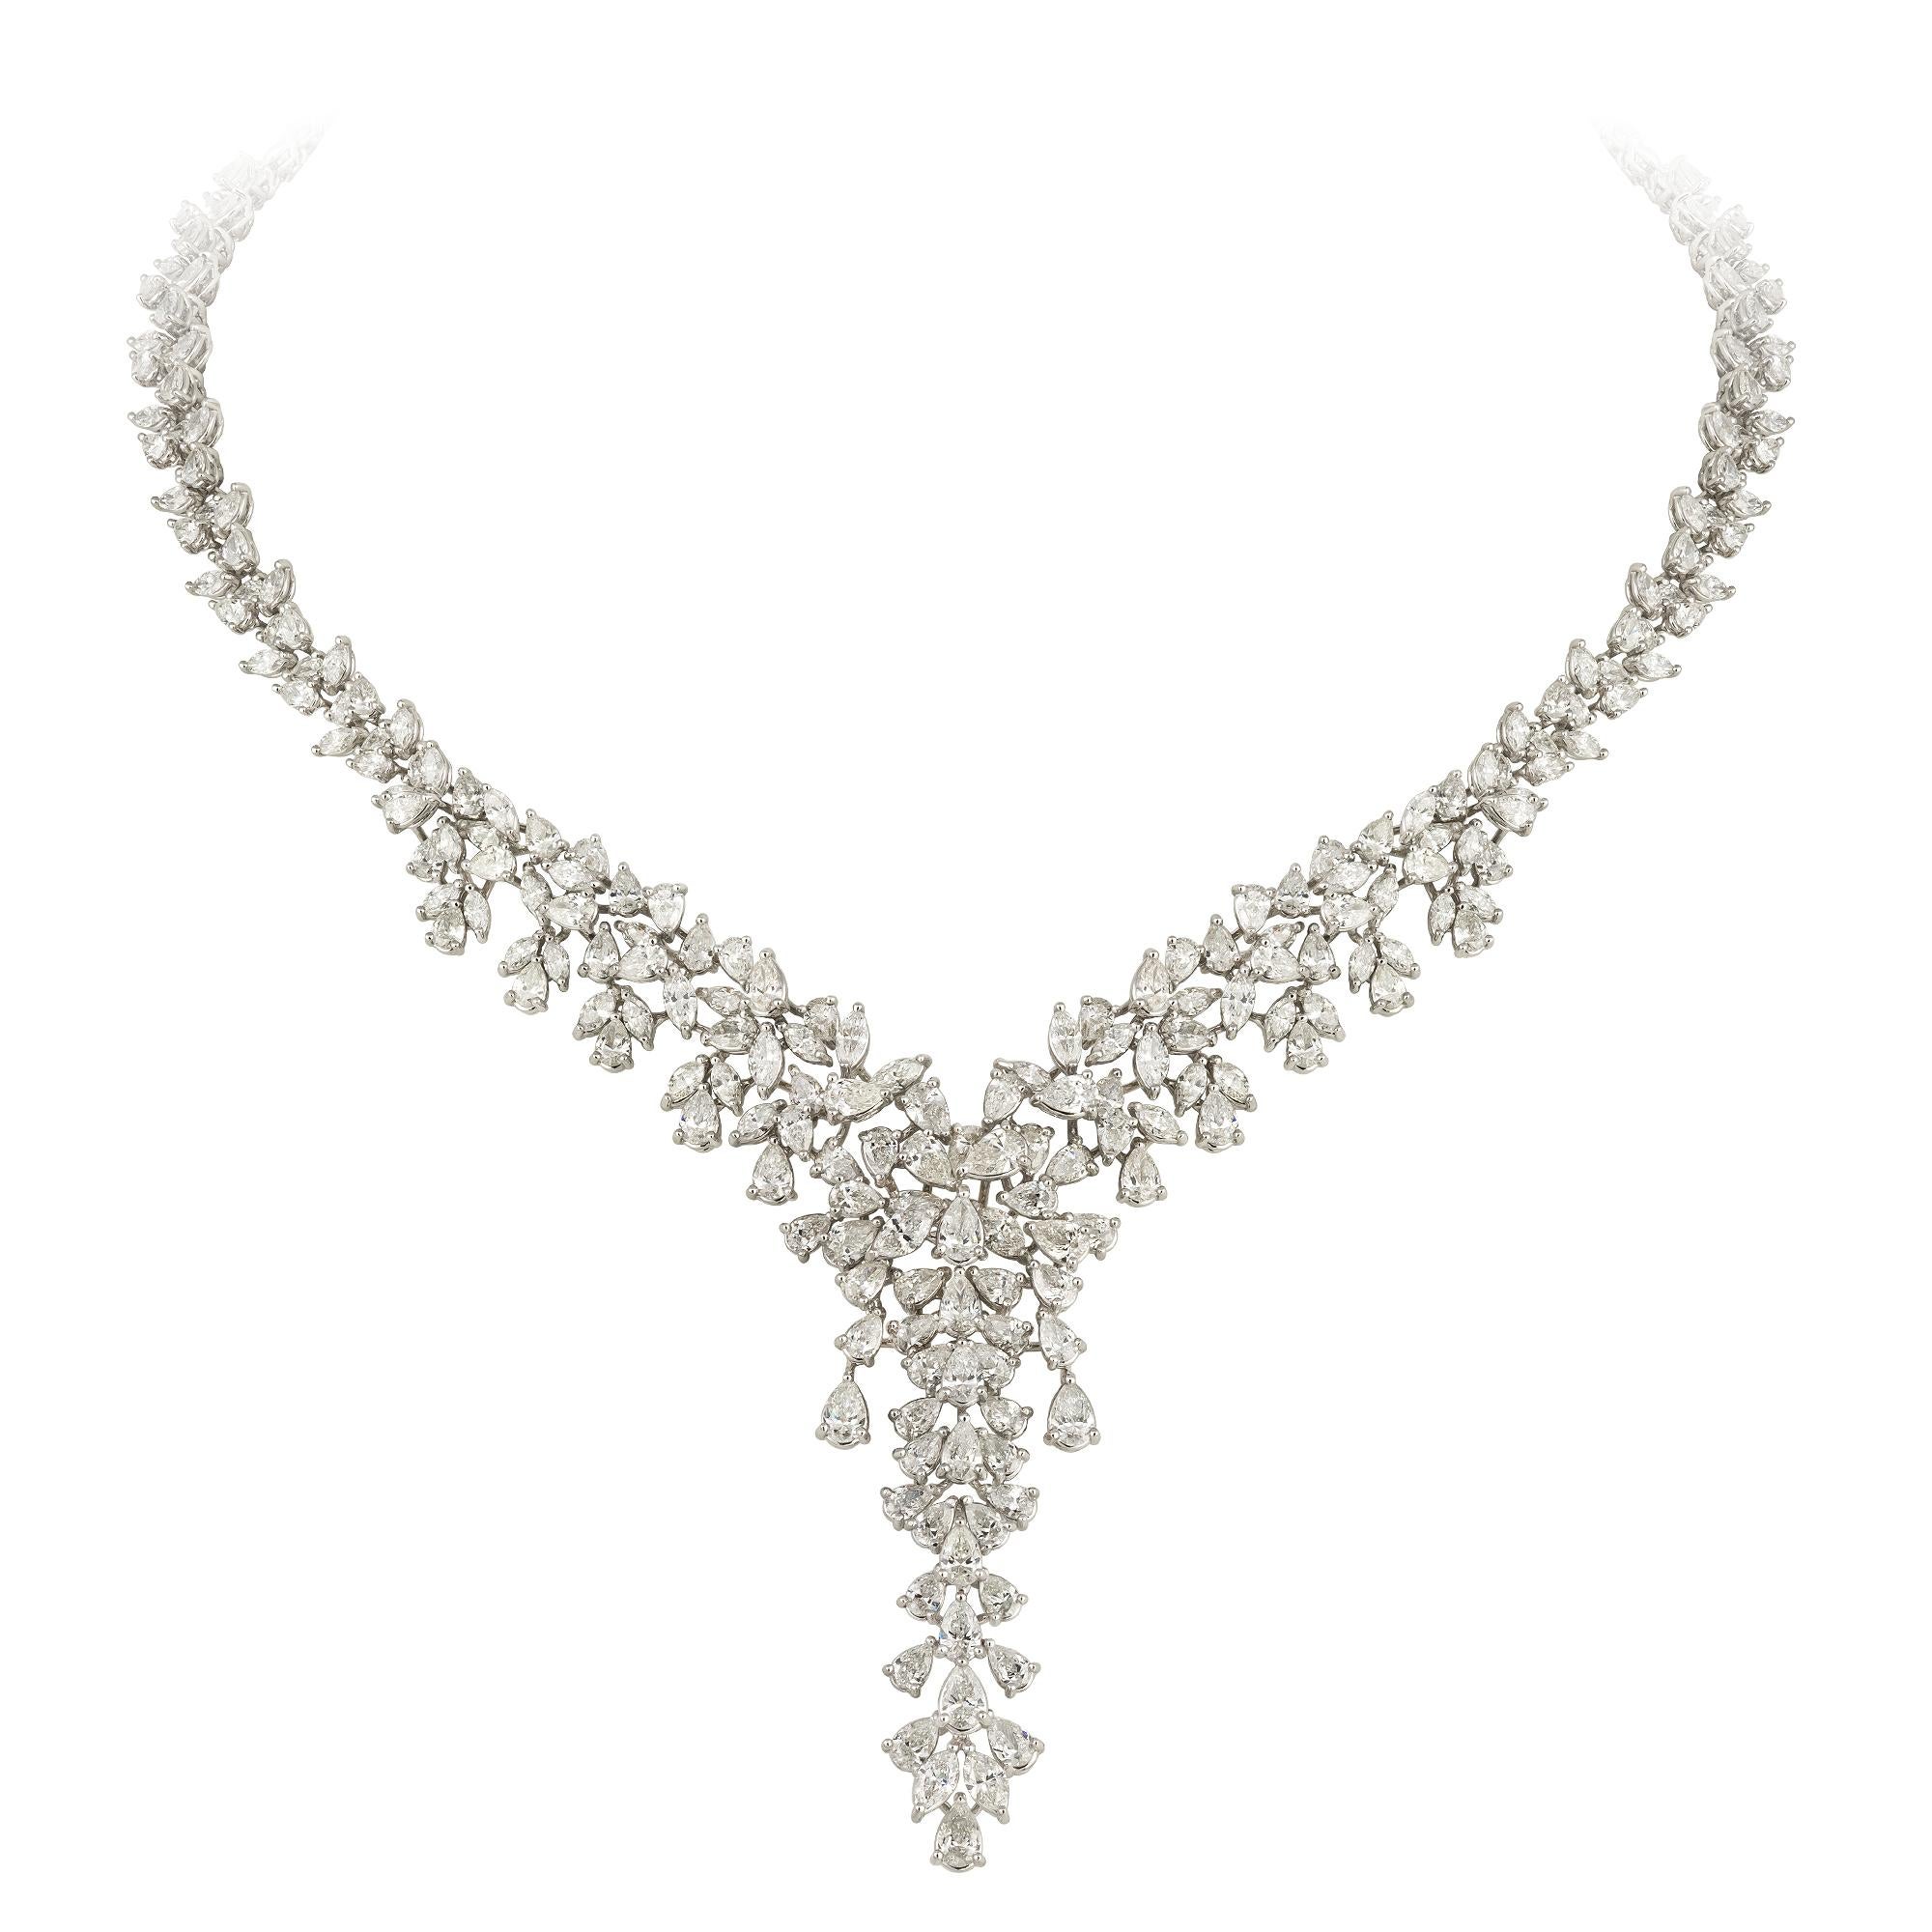 White Gold 18K Necklace 

Diamond MQ 6.21 Cts/83 Pcs
PE 16.27 Cts/162 Pcs
Weight 51,04 grams
Length 45 cm (adjustable)

With a heritage of ancient fine Swiss jewelry traditions, NATKINA is a Geneva based jewellery brand, which creates modern